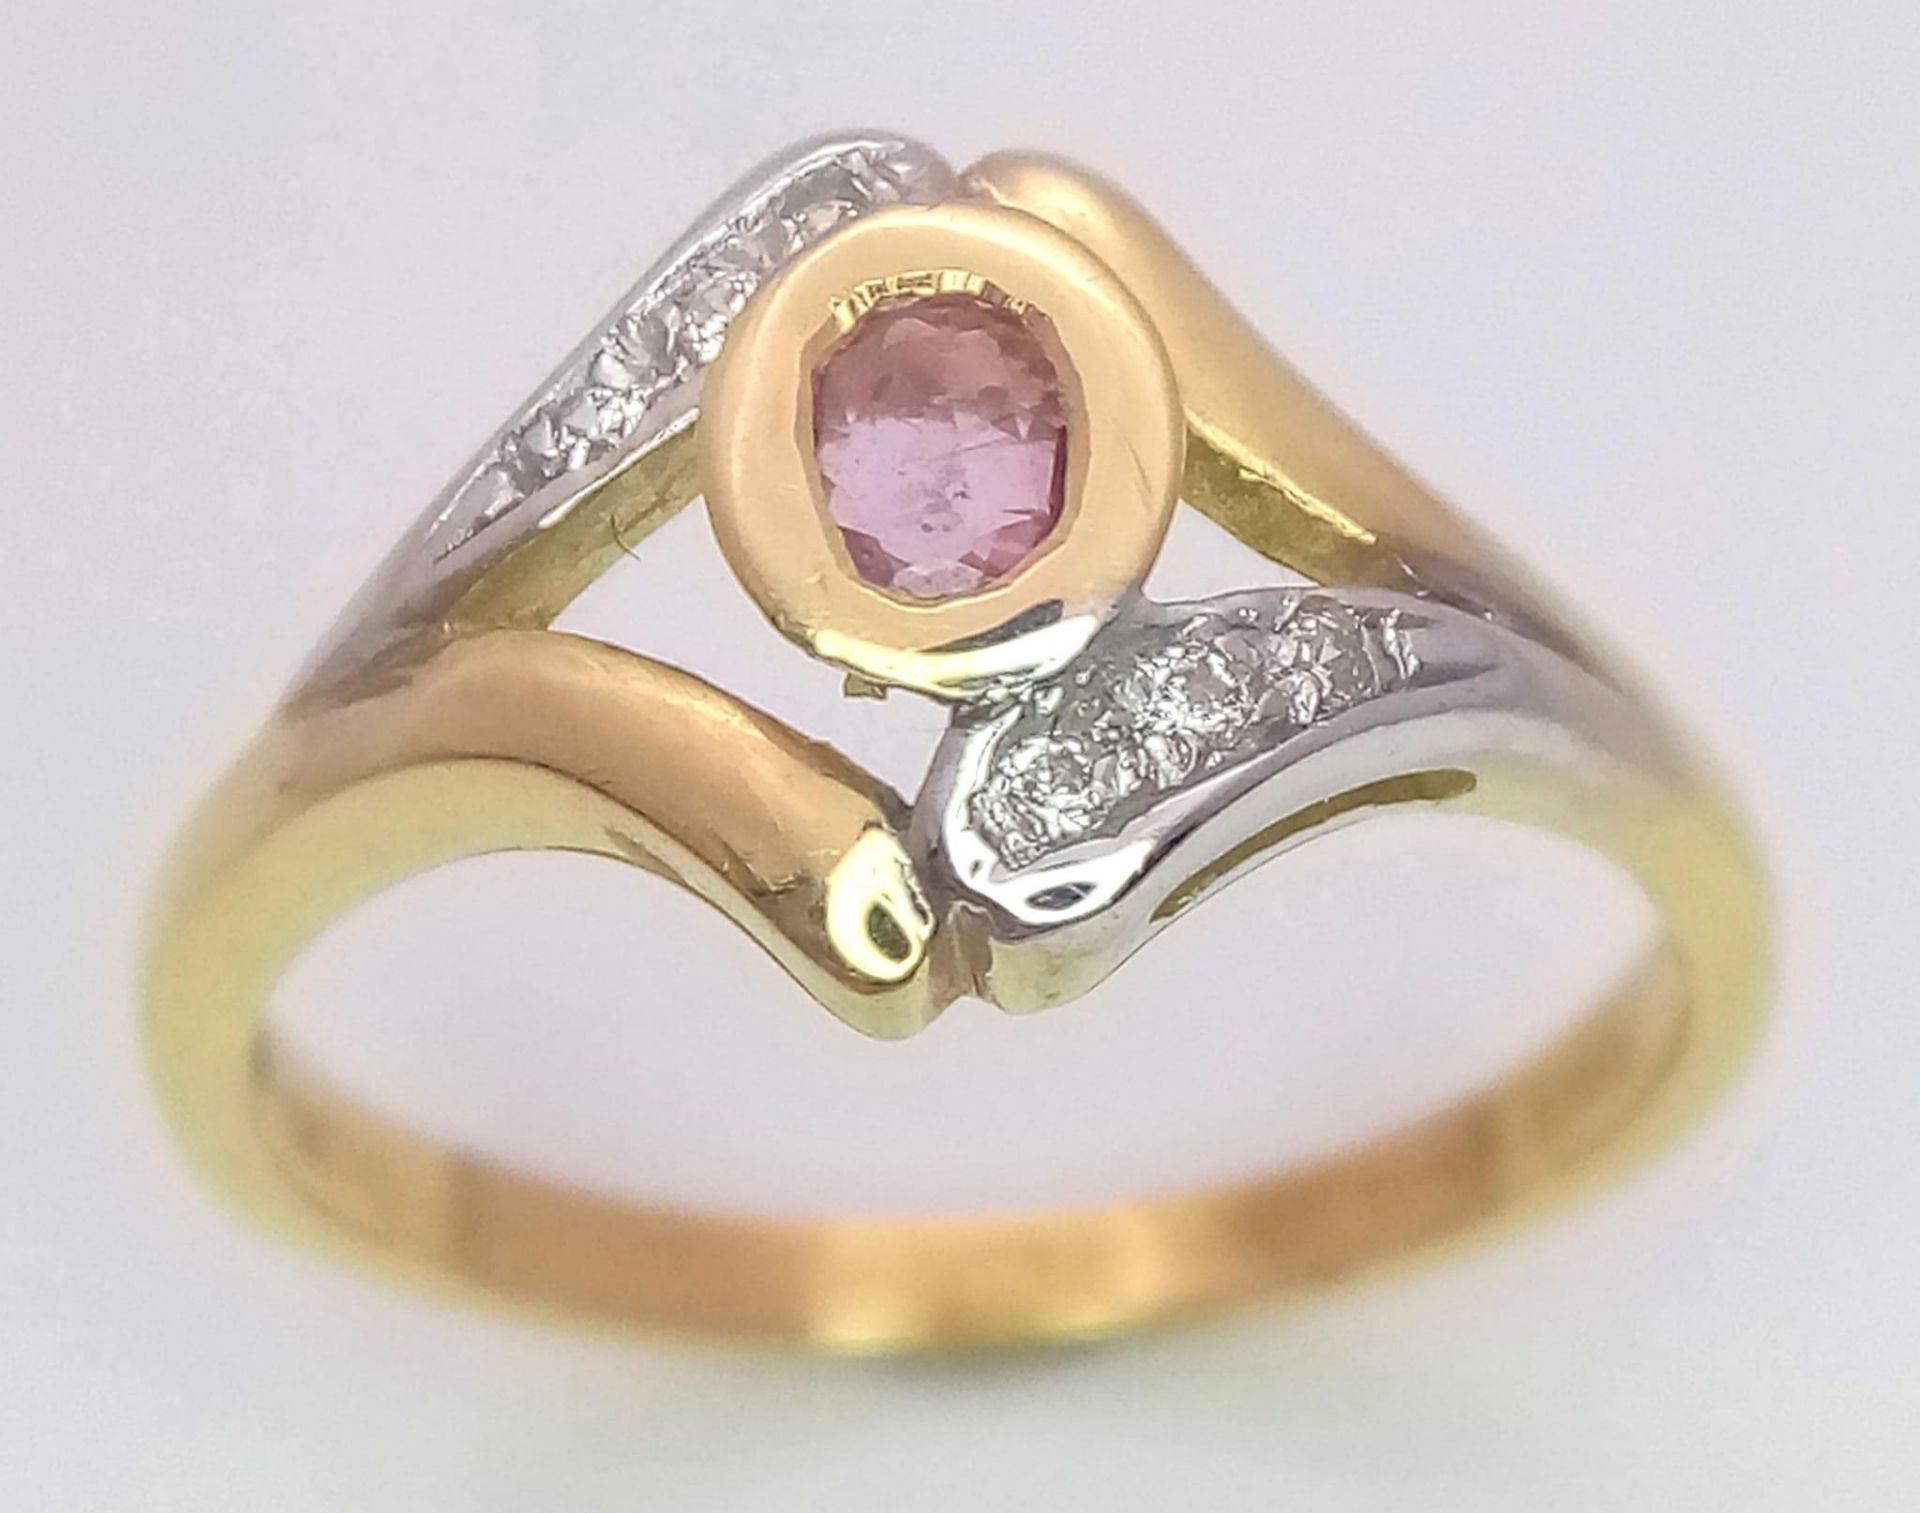 AN ATTRACTIVE 18K YELLOW AND WHITE GOLD DIAMOND & PINK SAPPHIRE RING, WEIGHT 3G SIZE M